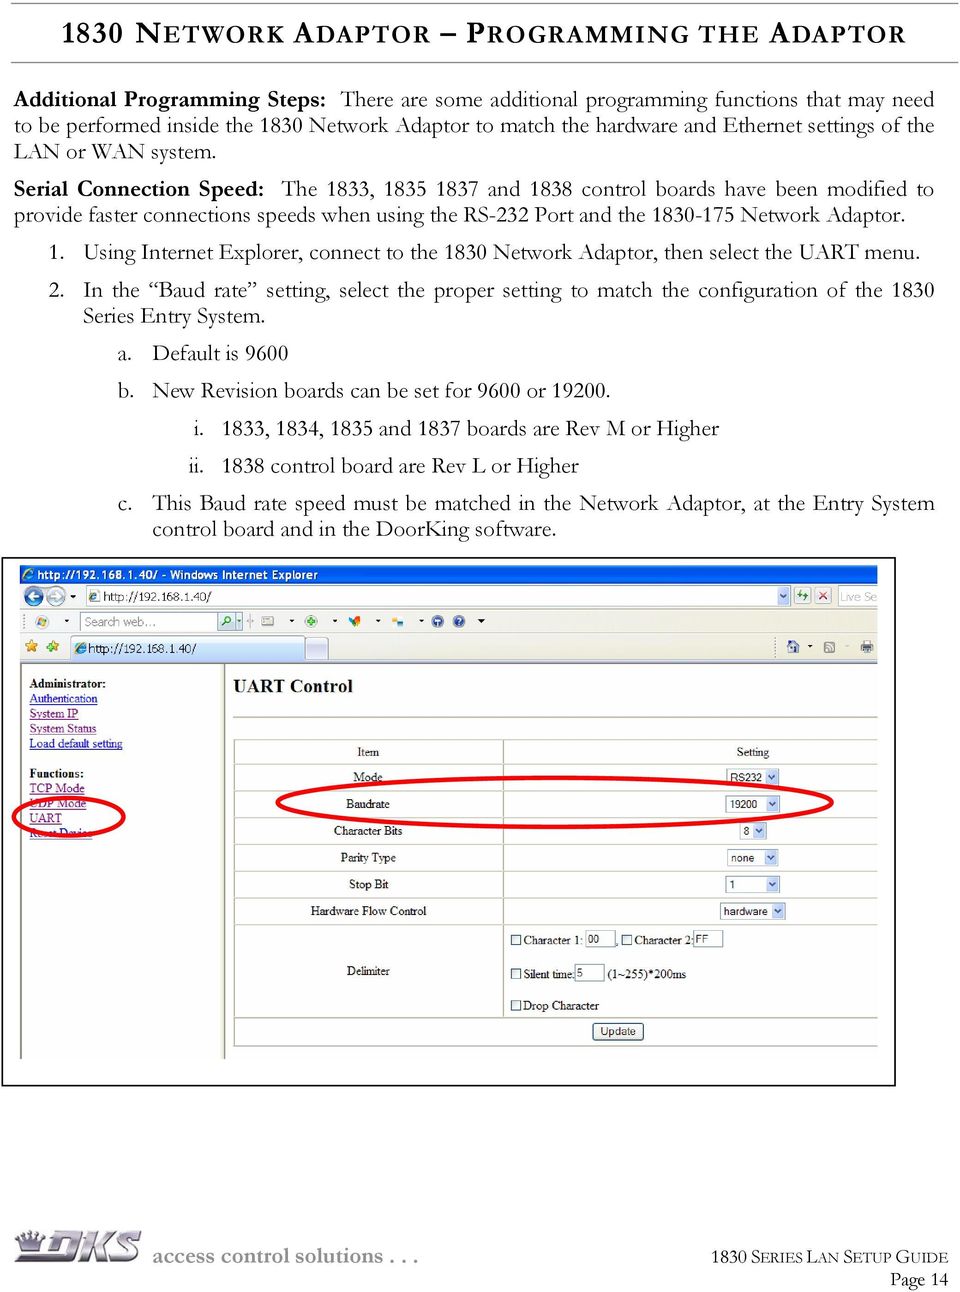 Serial Connection Speed: The 1833, 1835 1837 and 1838 control boards have been modified to provide faster connections speeds when using the RS-232 Port and the 1830-175 Network Adaptor. 1. Using Internet Explorer, connect to the 1830 Network Adaptor, then select the UART menu.